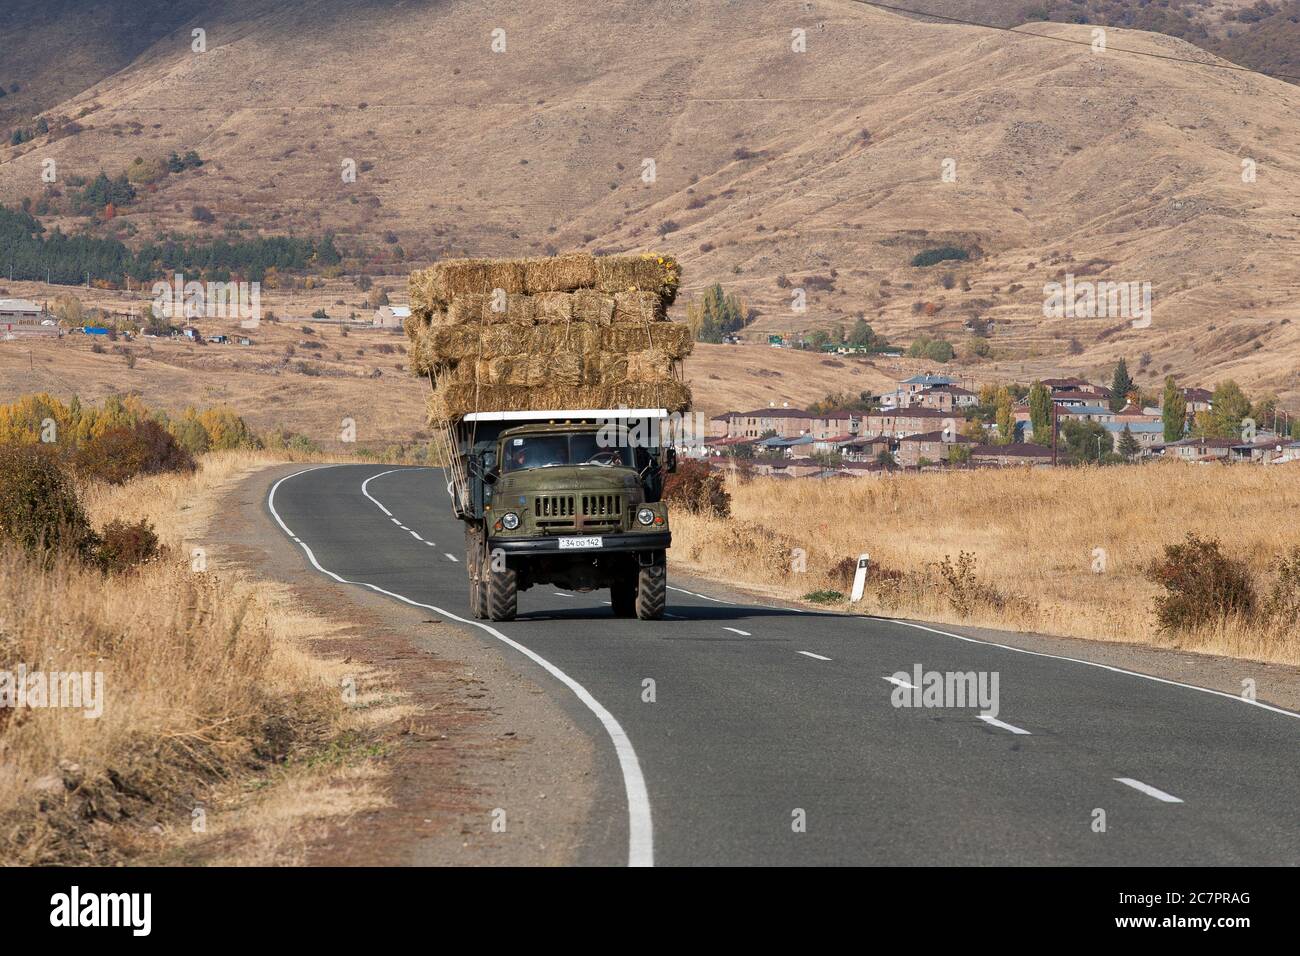 Trucks of shapes and sizes move large goods around Armenia, such as this farm truck transporting bales of hay. Stock Photo